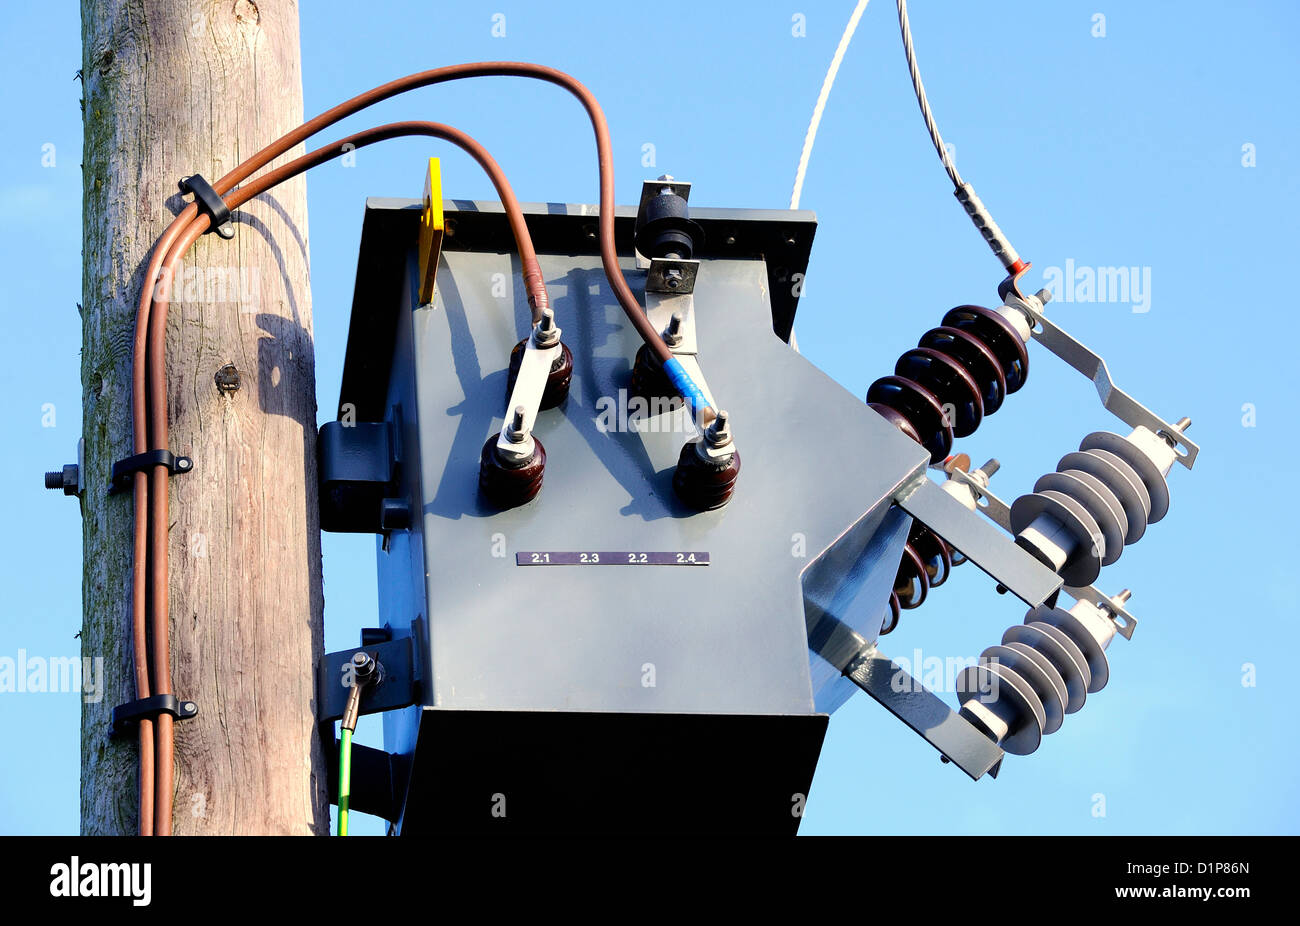 11 KV pole mounted two phase transformer with ceramic insulators and uninsulated conductors. Two core secondary output. Stock Photo